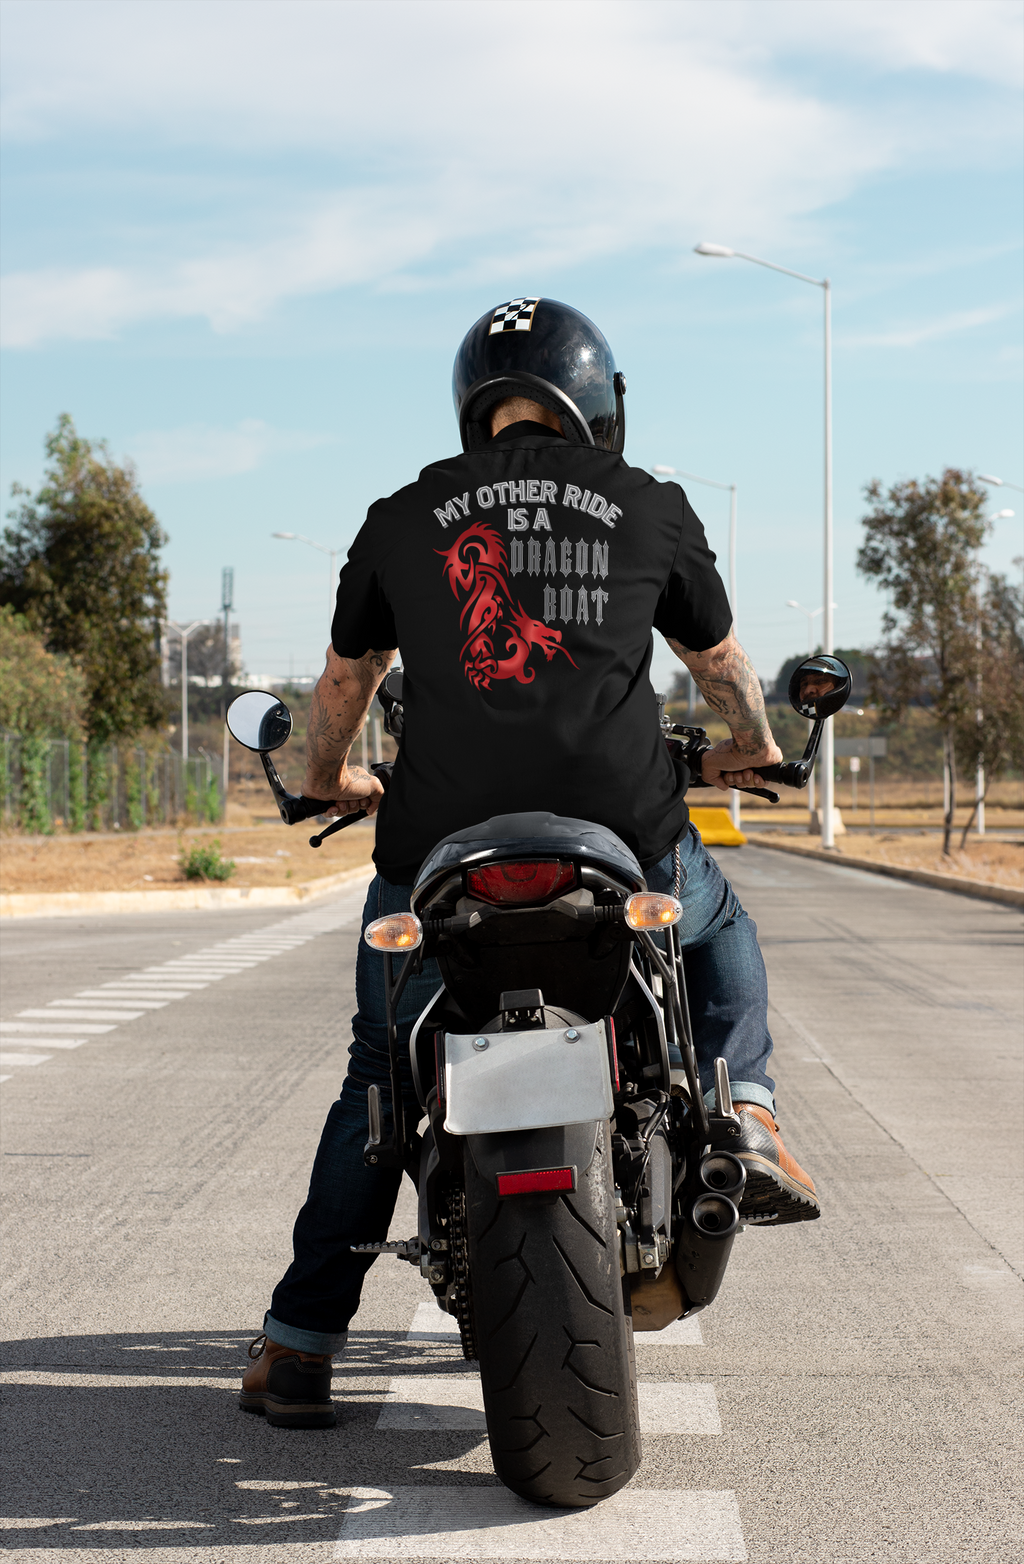 Dragon Boat T-Shirt | My Other Ride is a Dragon Boat | Motorcycle connoisseur | egans-creek.com